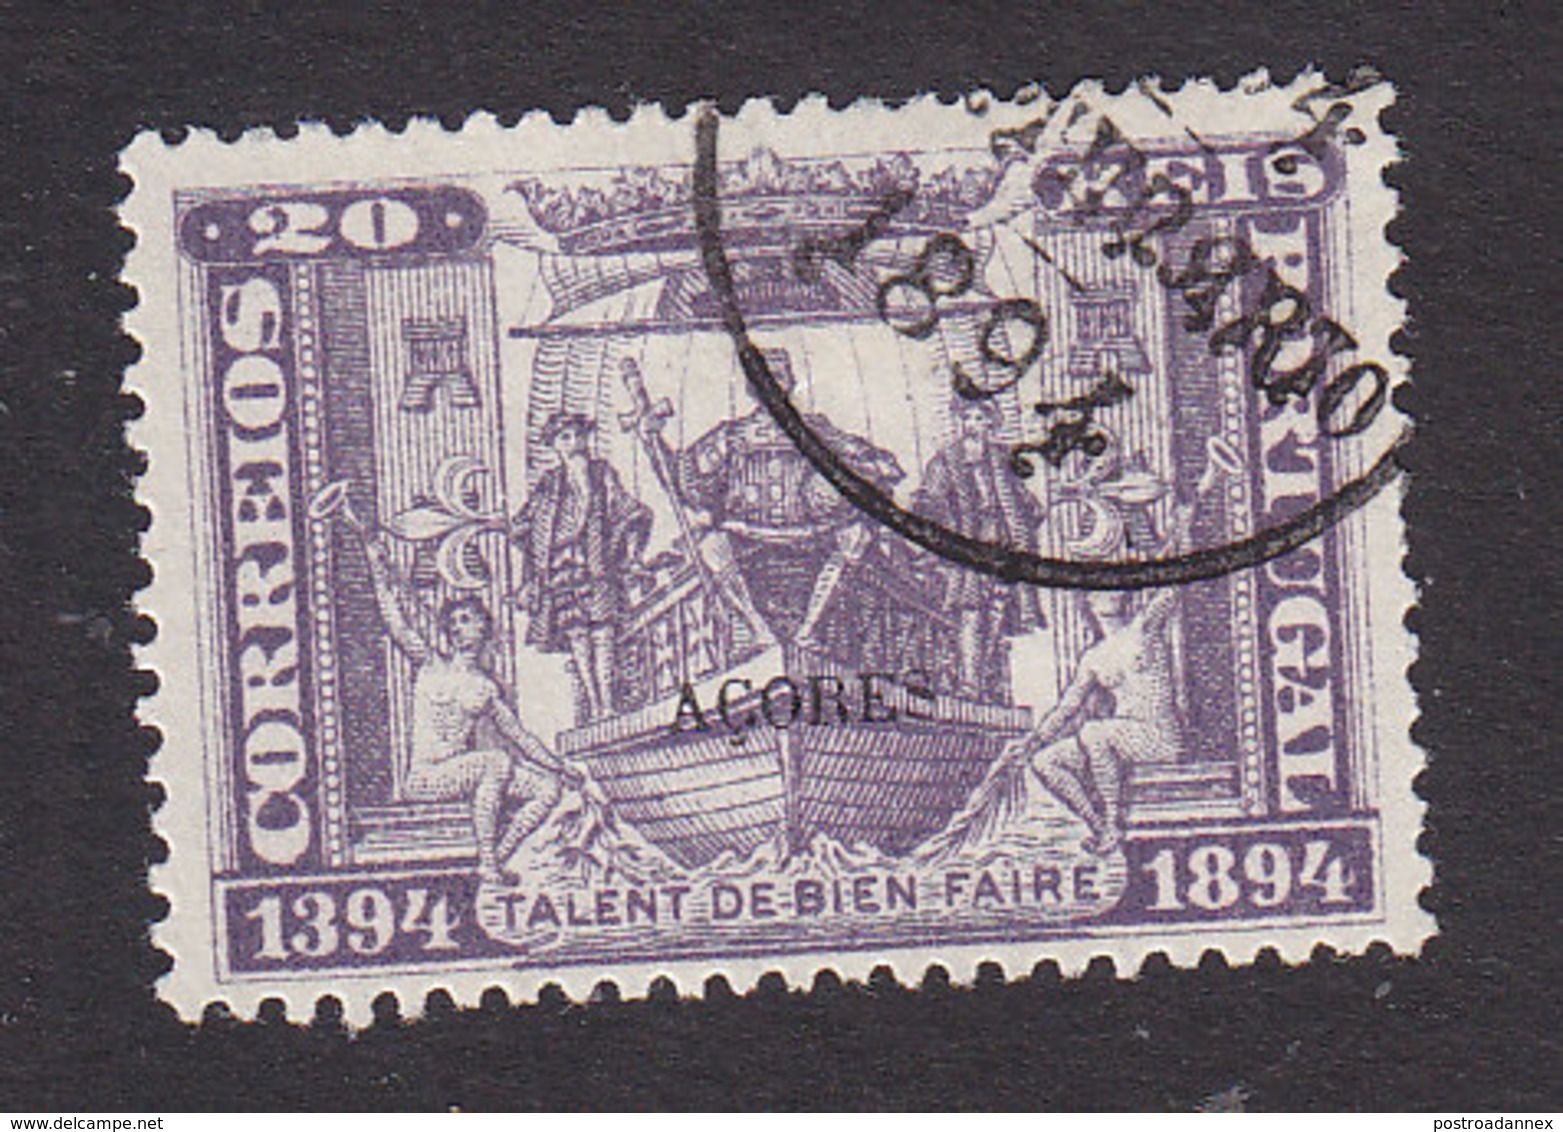 Azores, Scott #68, Used, Prince Henry On His Ship Overprinted, Issued 1894 - Açores